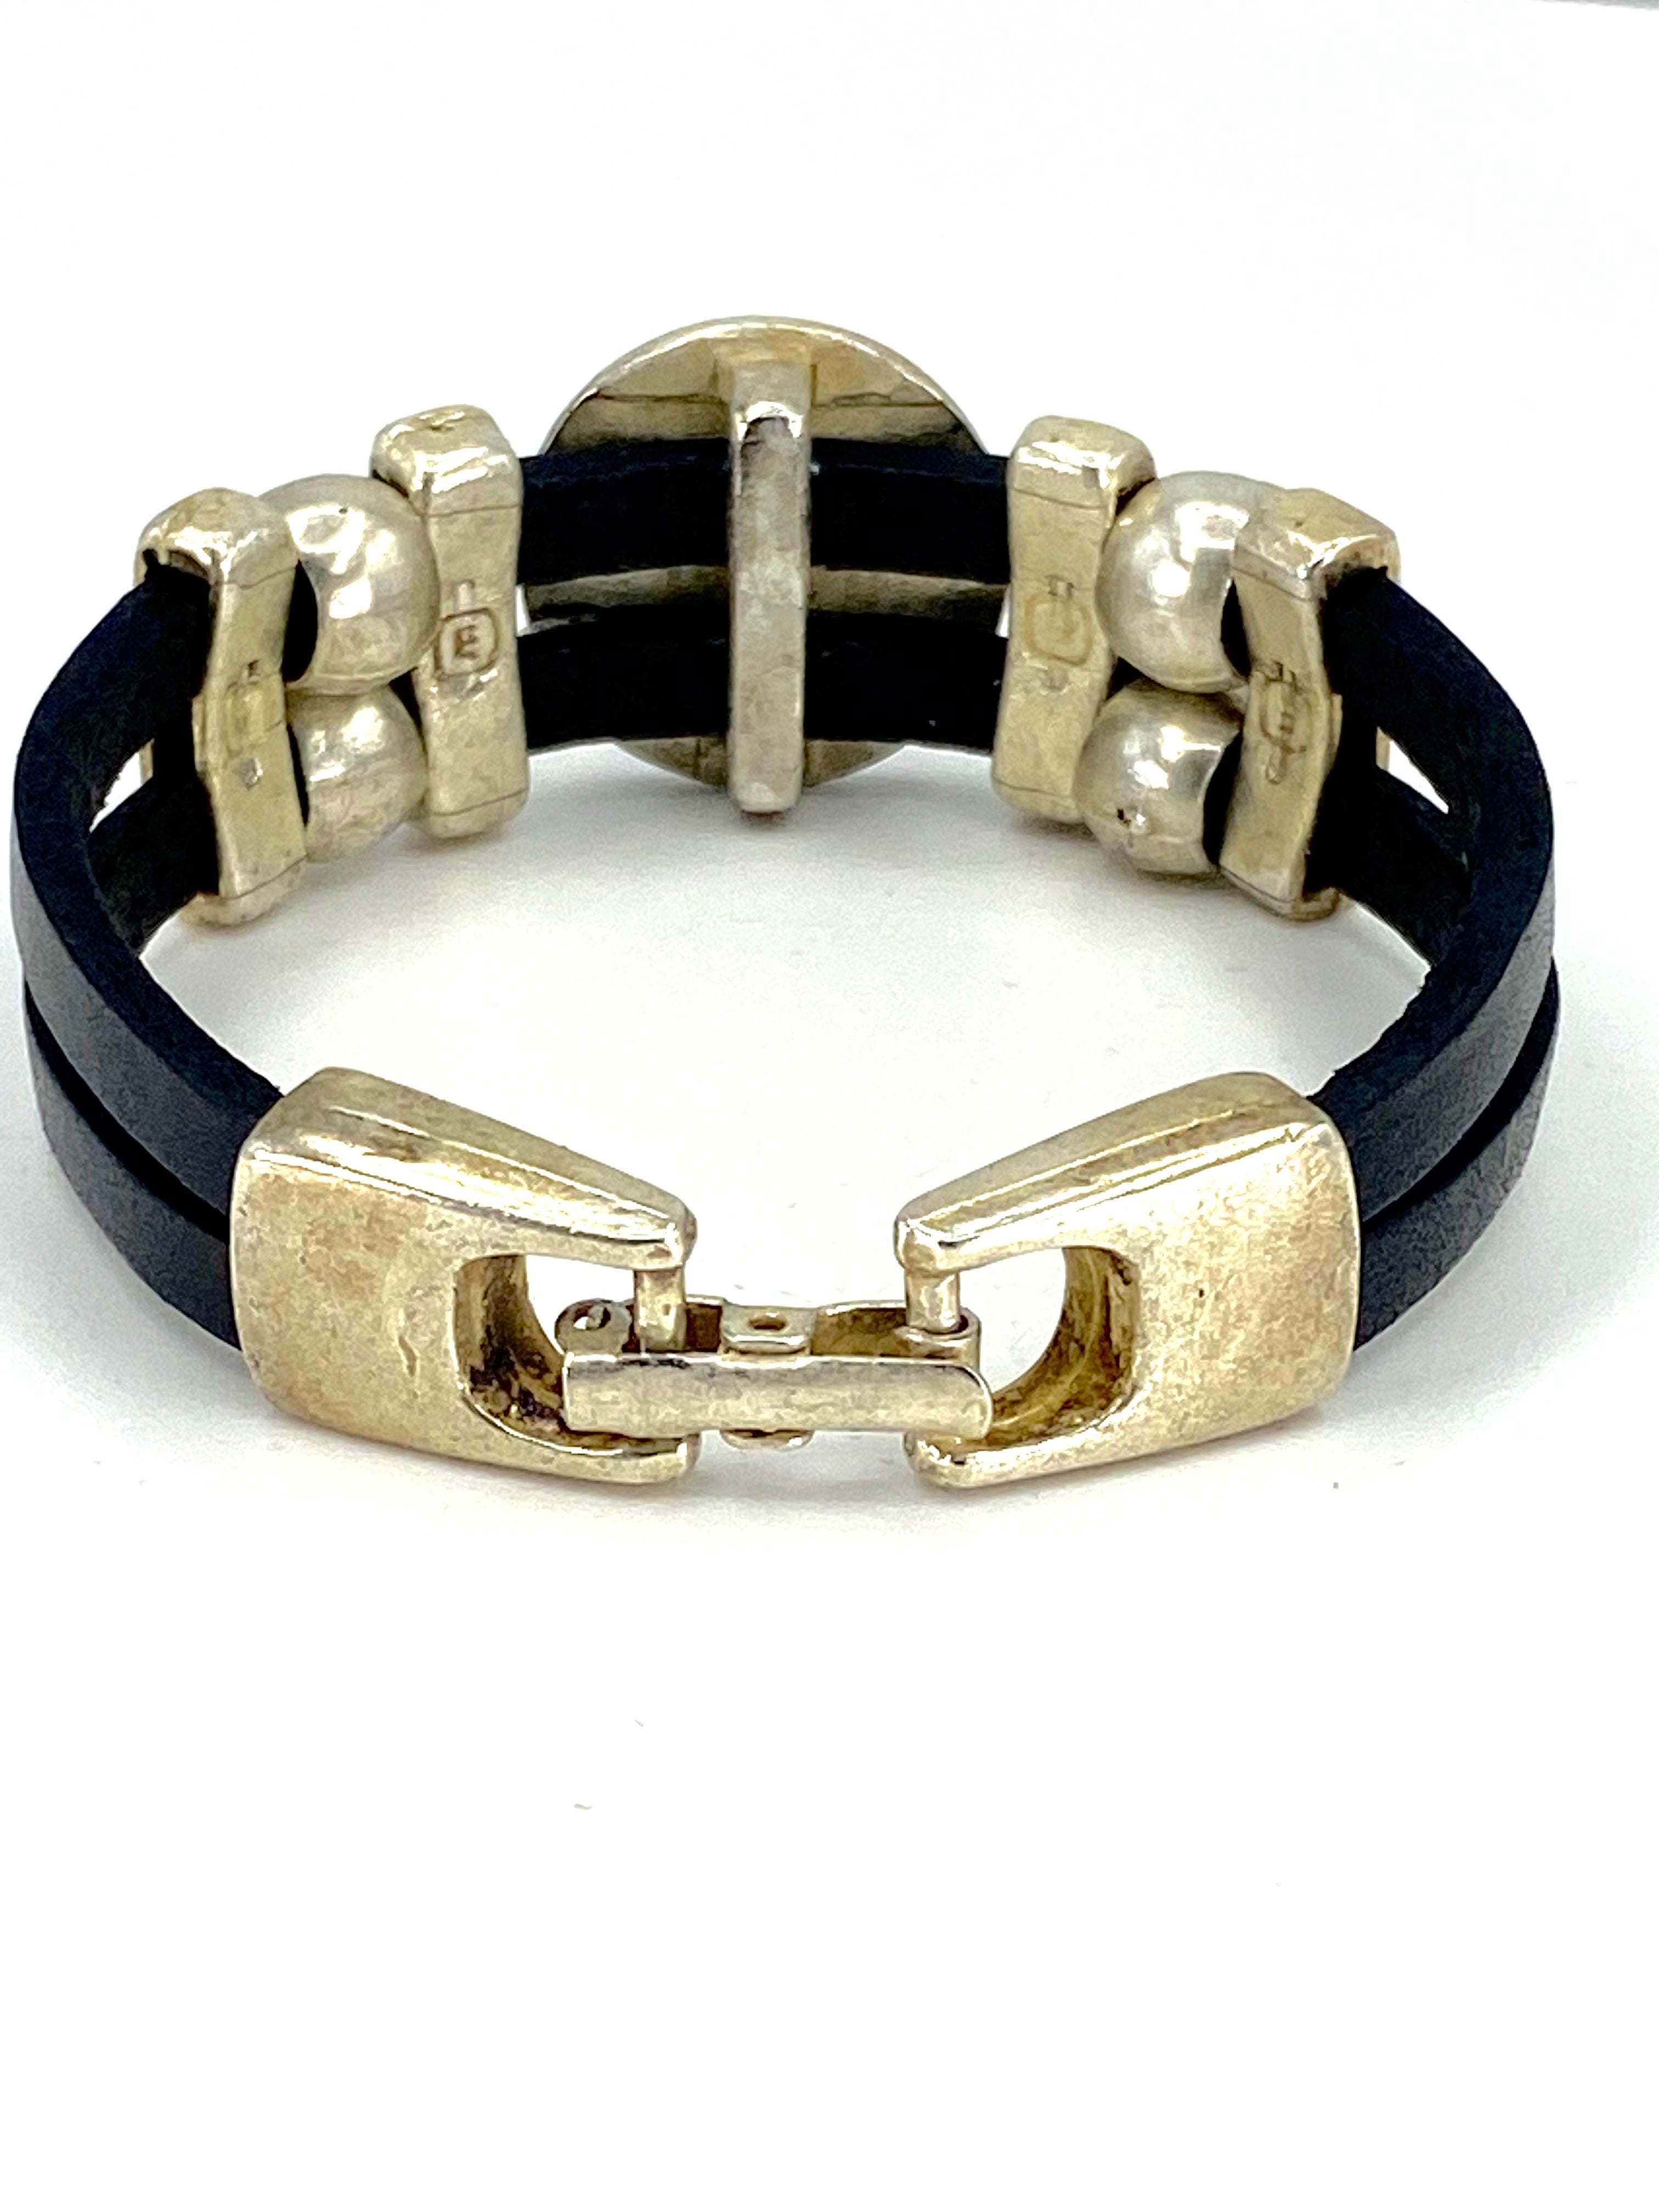 Bracelet of  The Madonna and Child Jesus bracelet handmade jewelry with Double Leather Straps by Graciela's Collection